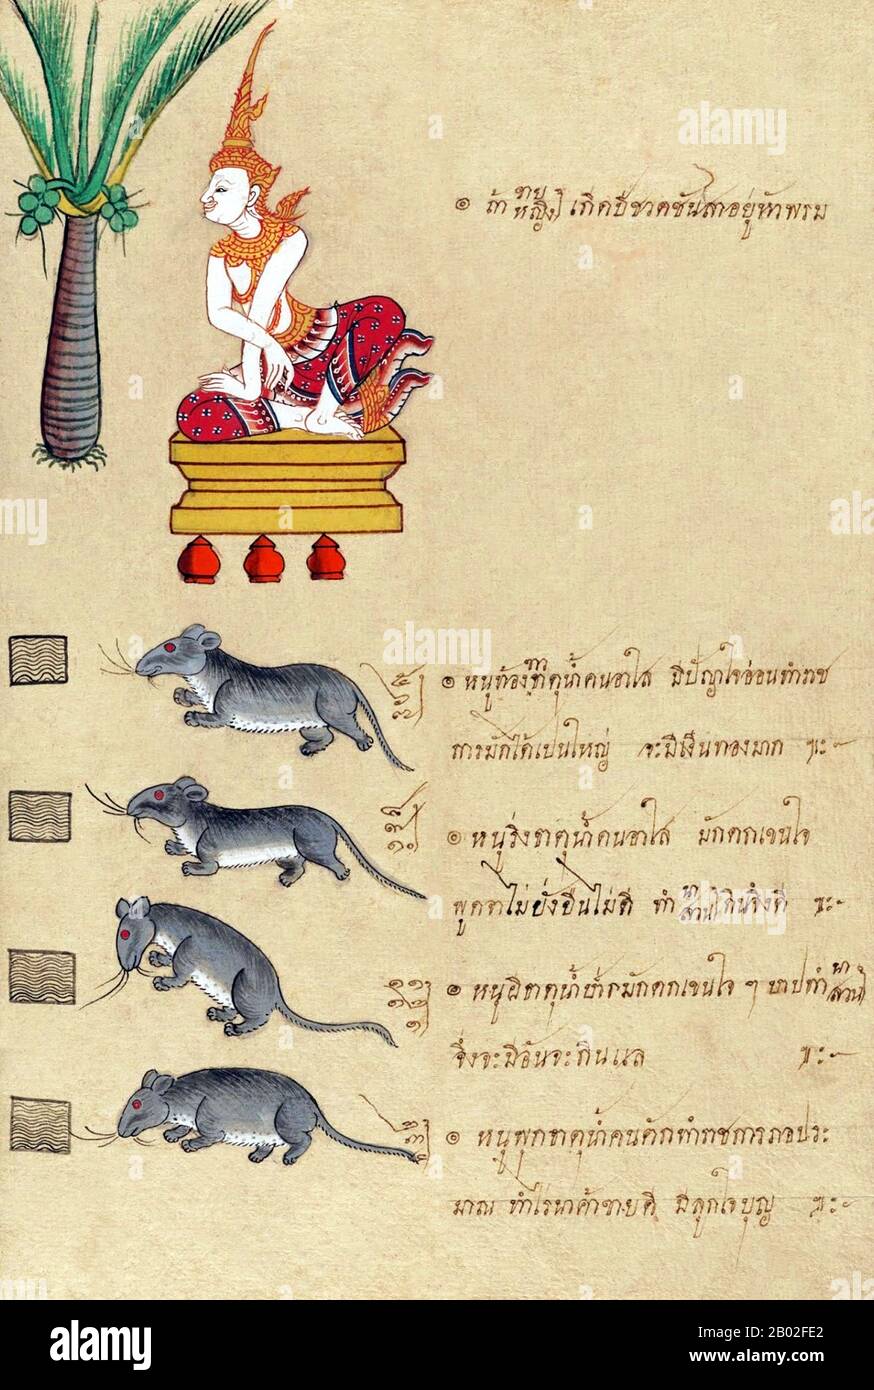 Pages from a Siamese fortune telling manual based on a 12 animal zodiac.  Thai Zodiac Signs are closely related to the Chinese Zodiac as both follow  the same 12 year lunar cycle.